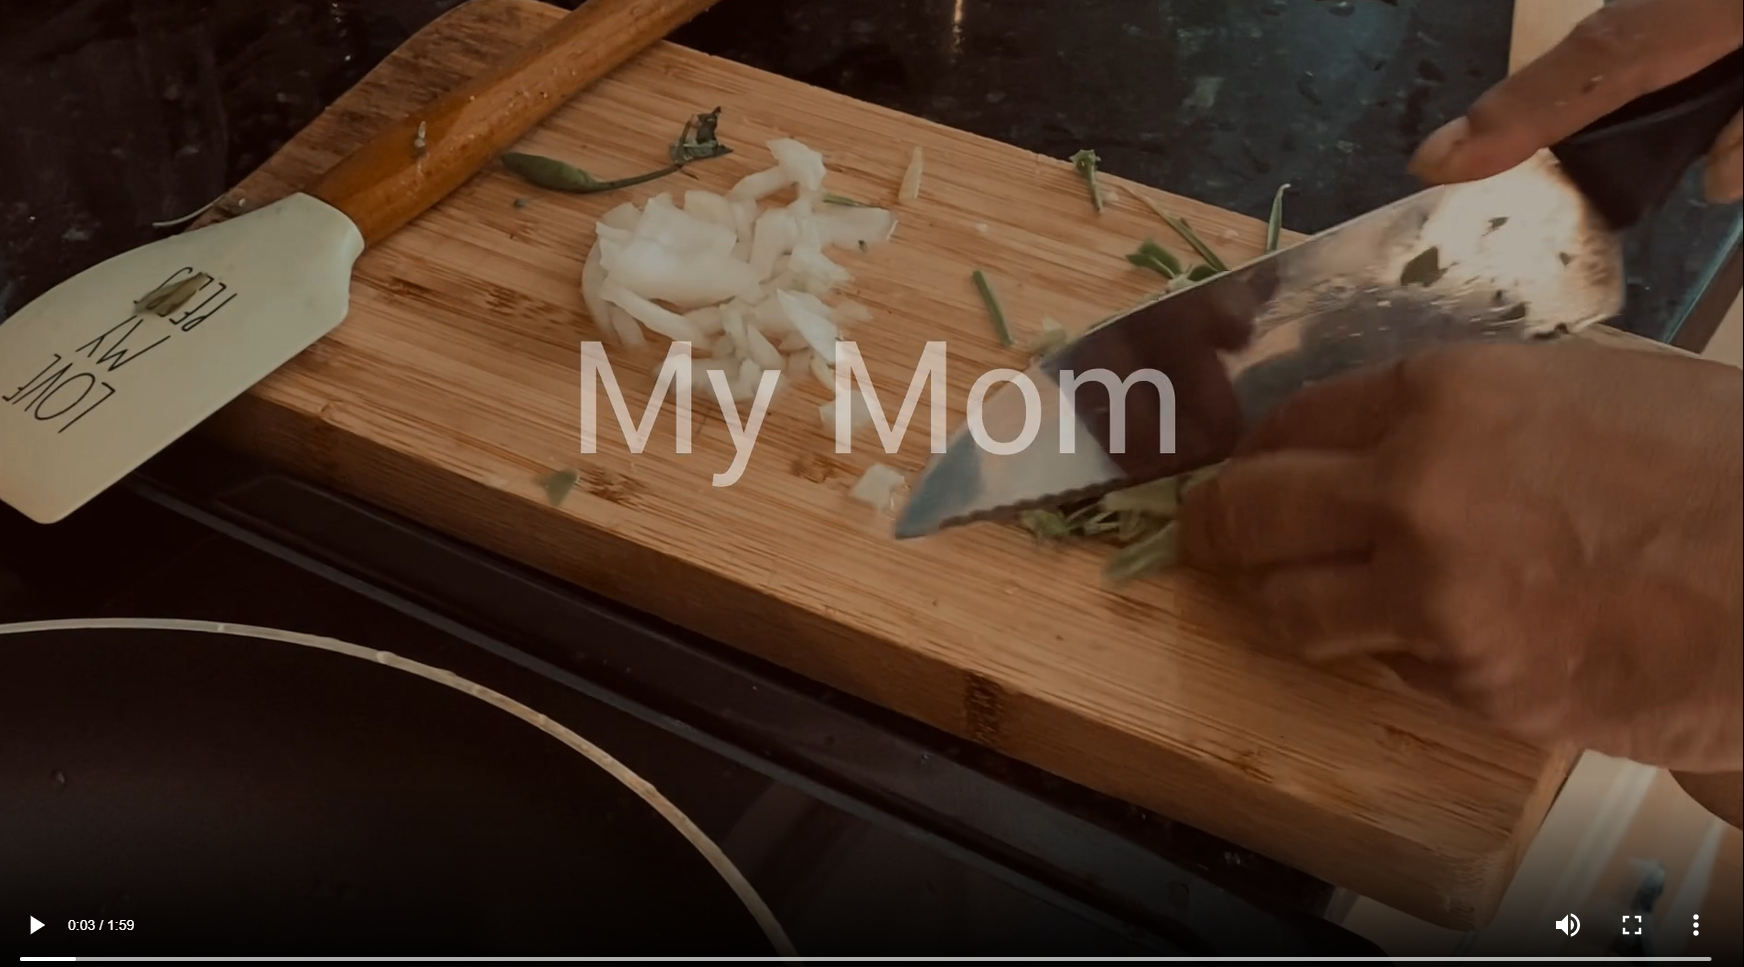 Afifah's mothers hands cutting up herbs for dinner. Title reads "My Mom"